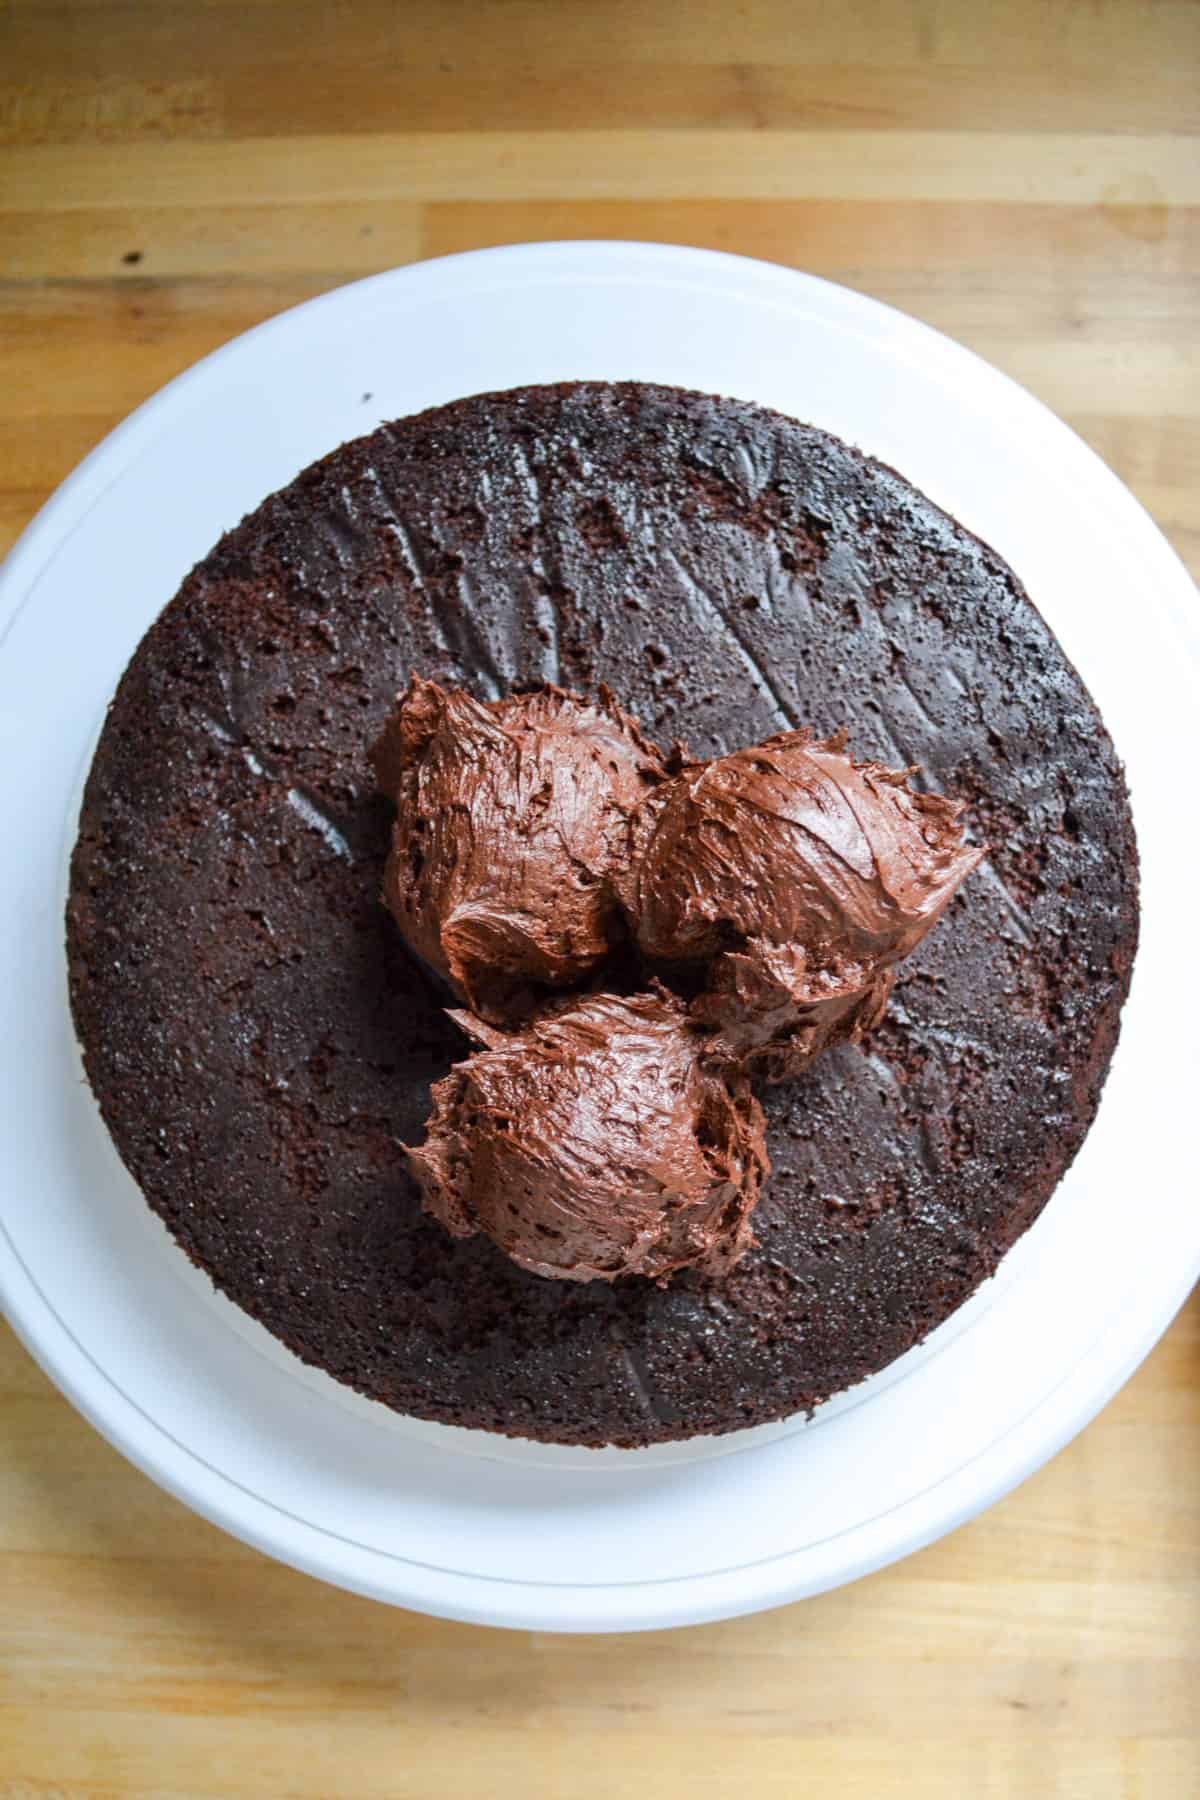 Vegan gluten free chocolate cake layer on a cake board with chocolate scoops of chocolate frosting on top of it.